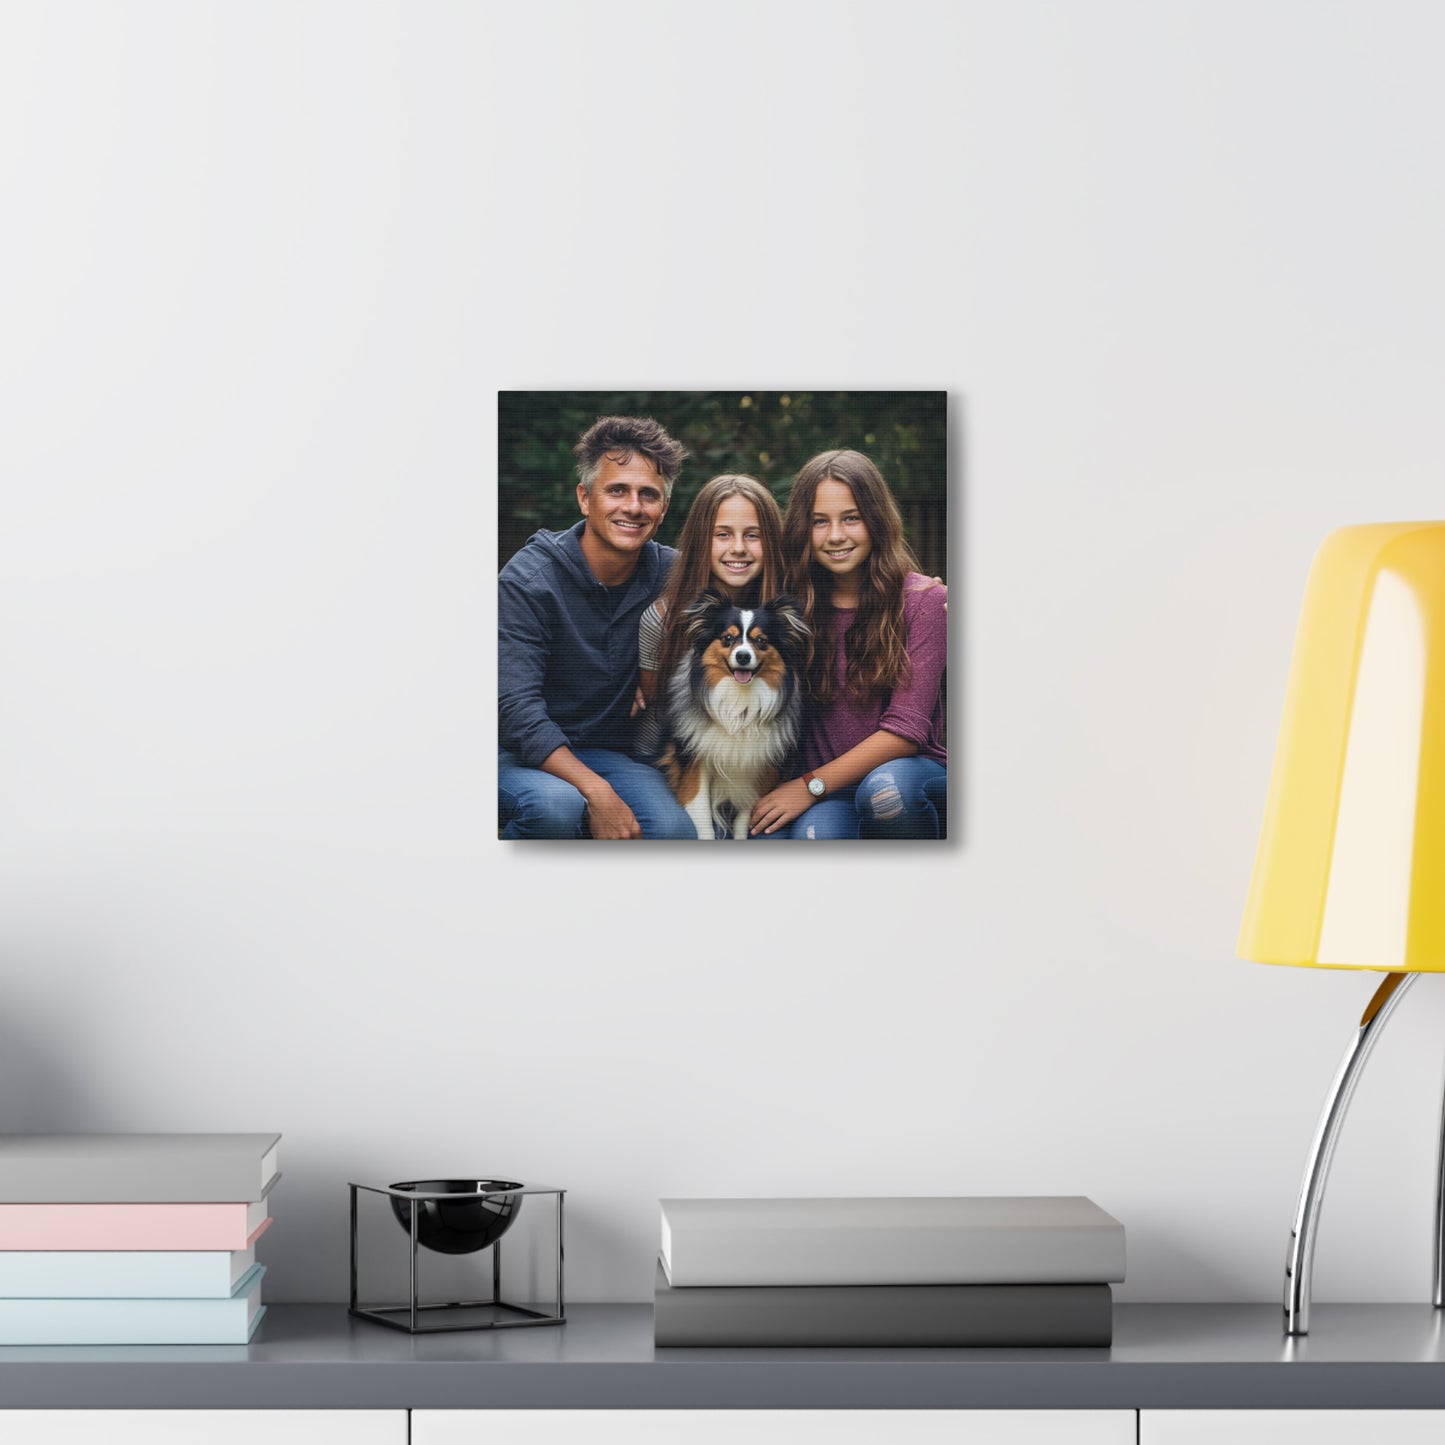 "Family Photo" Custom Wall Art - Weave Got Gifts - Unique Gifts You Won’t Find Anywhere Else!